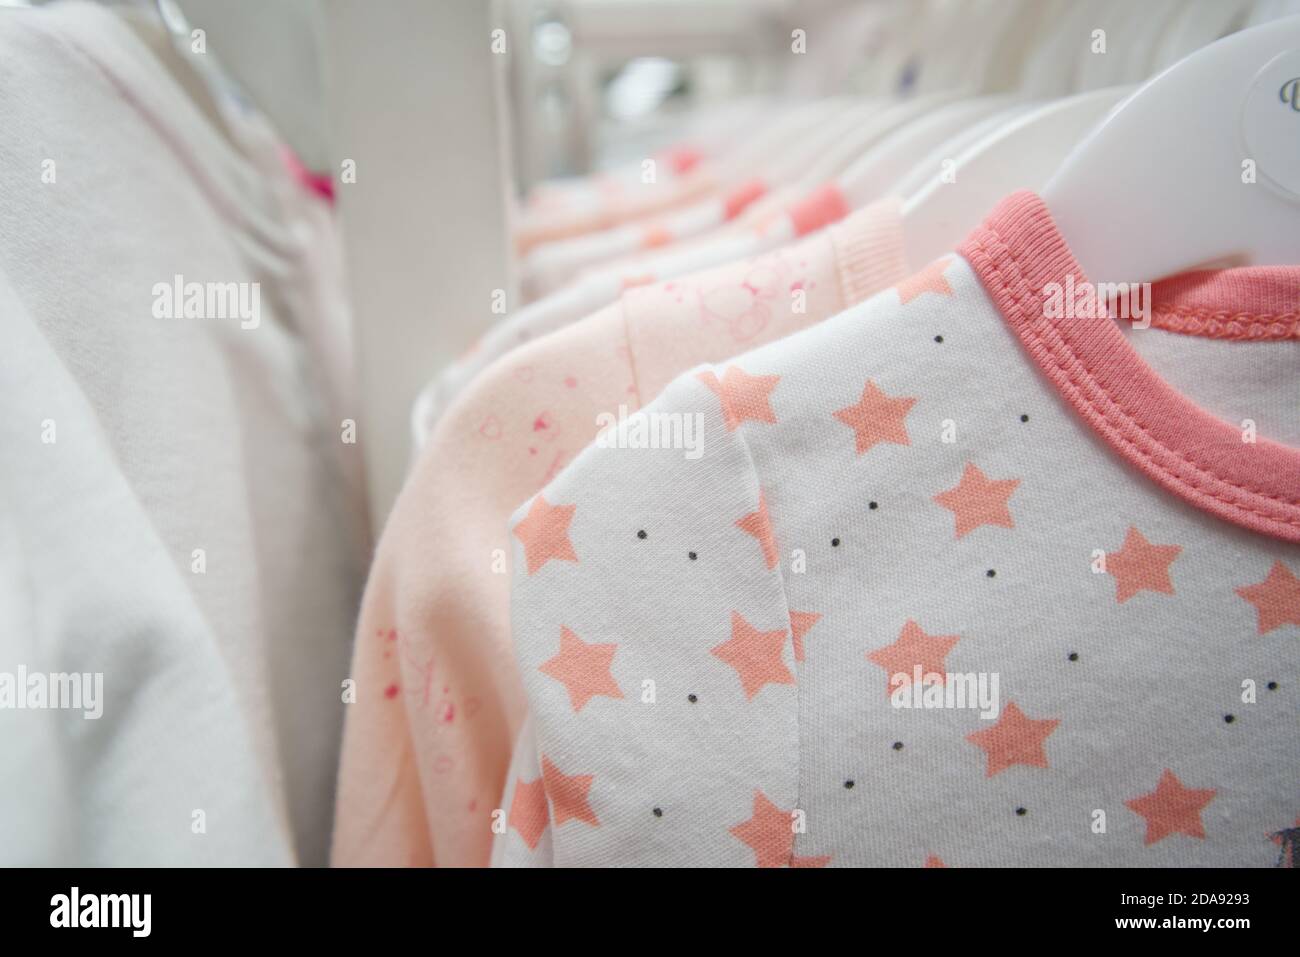 Childrens cloth rack in bright color tone with stars Stock Photo